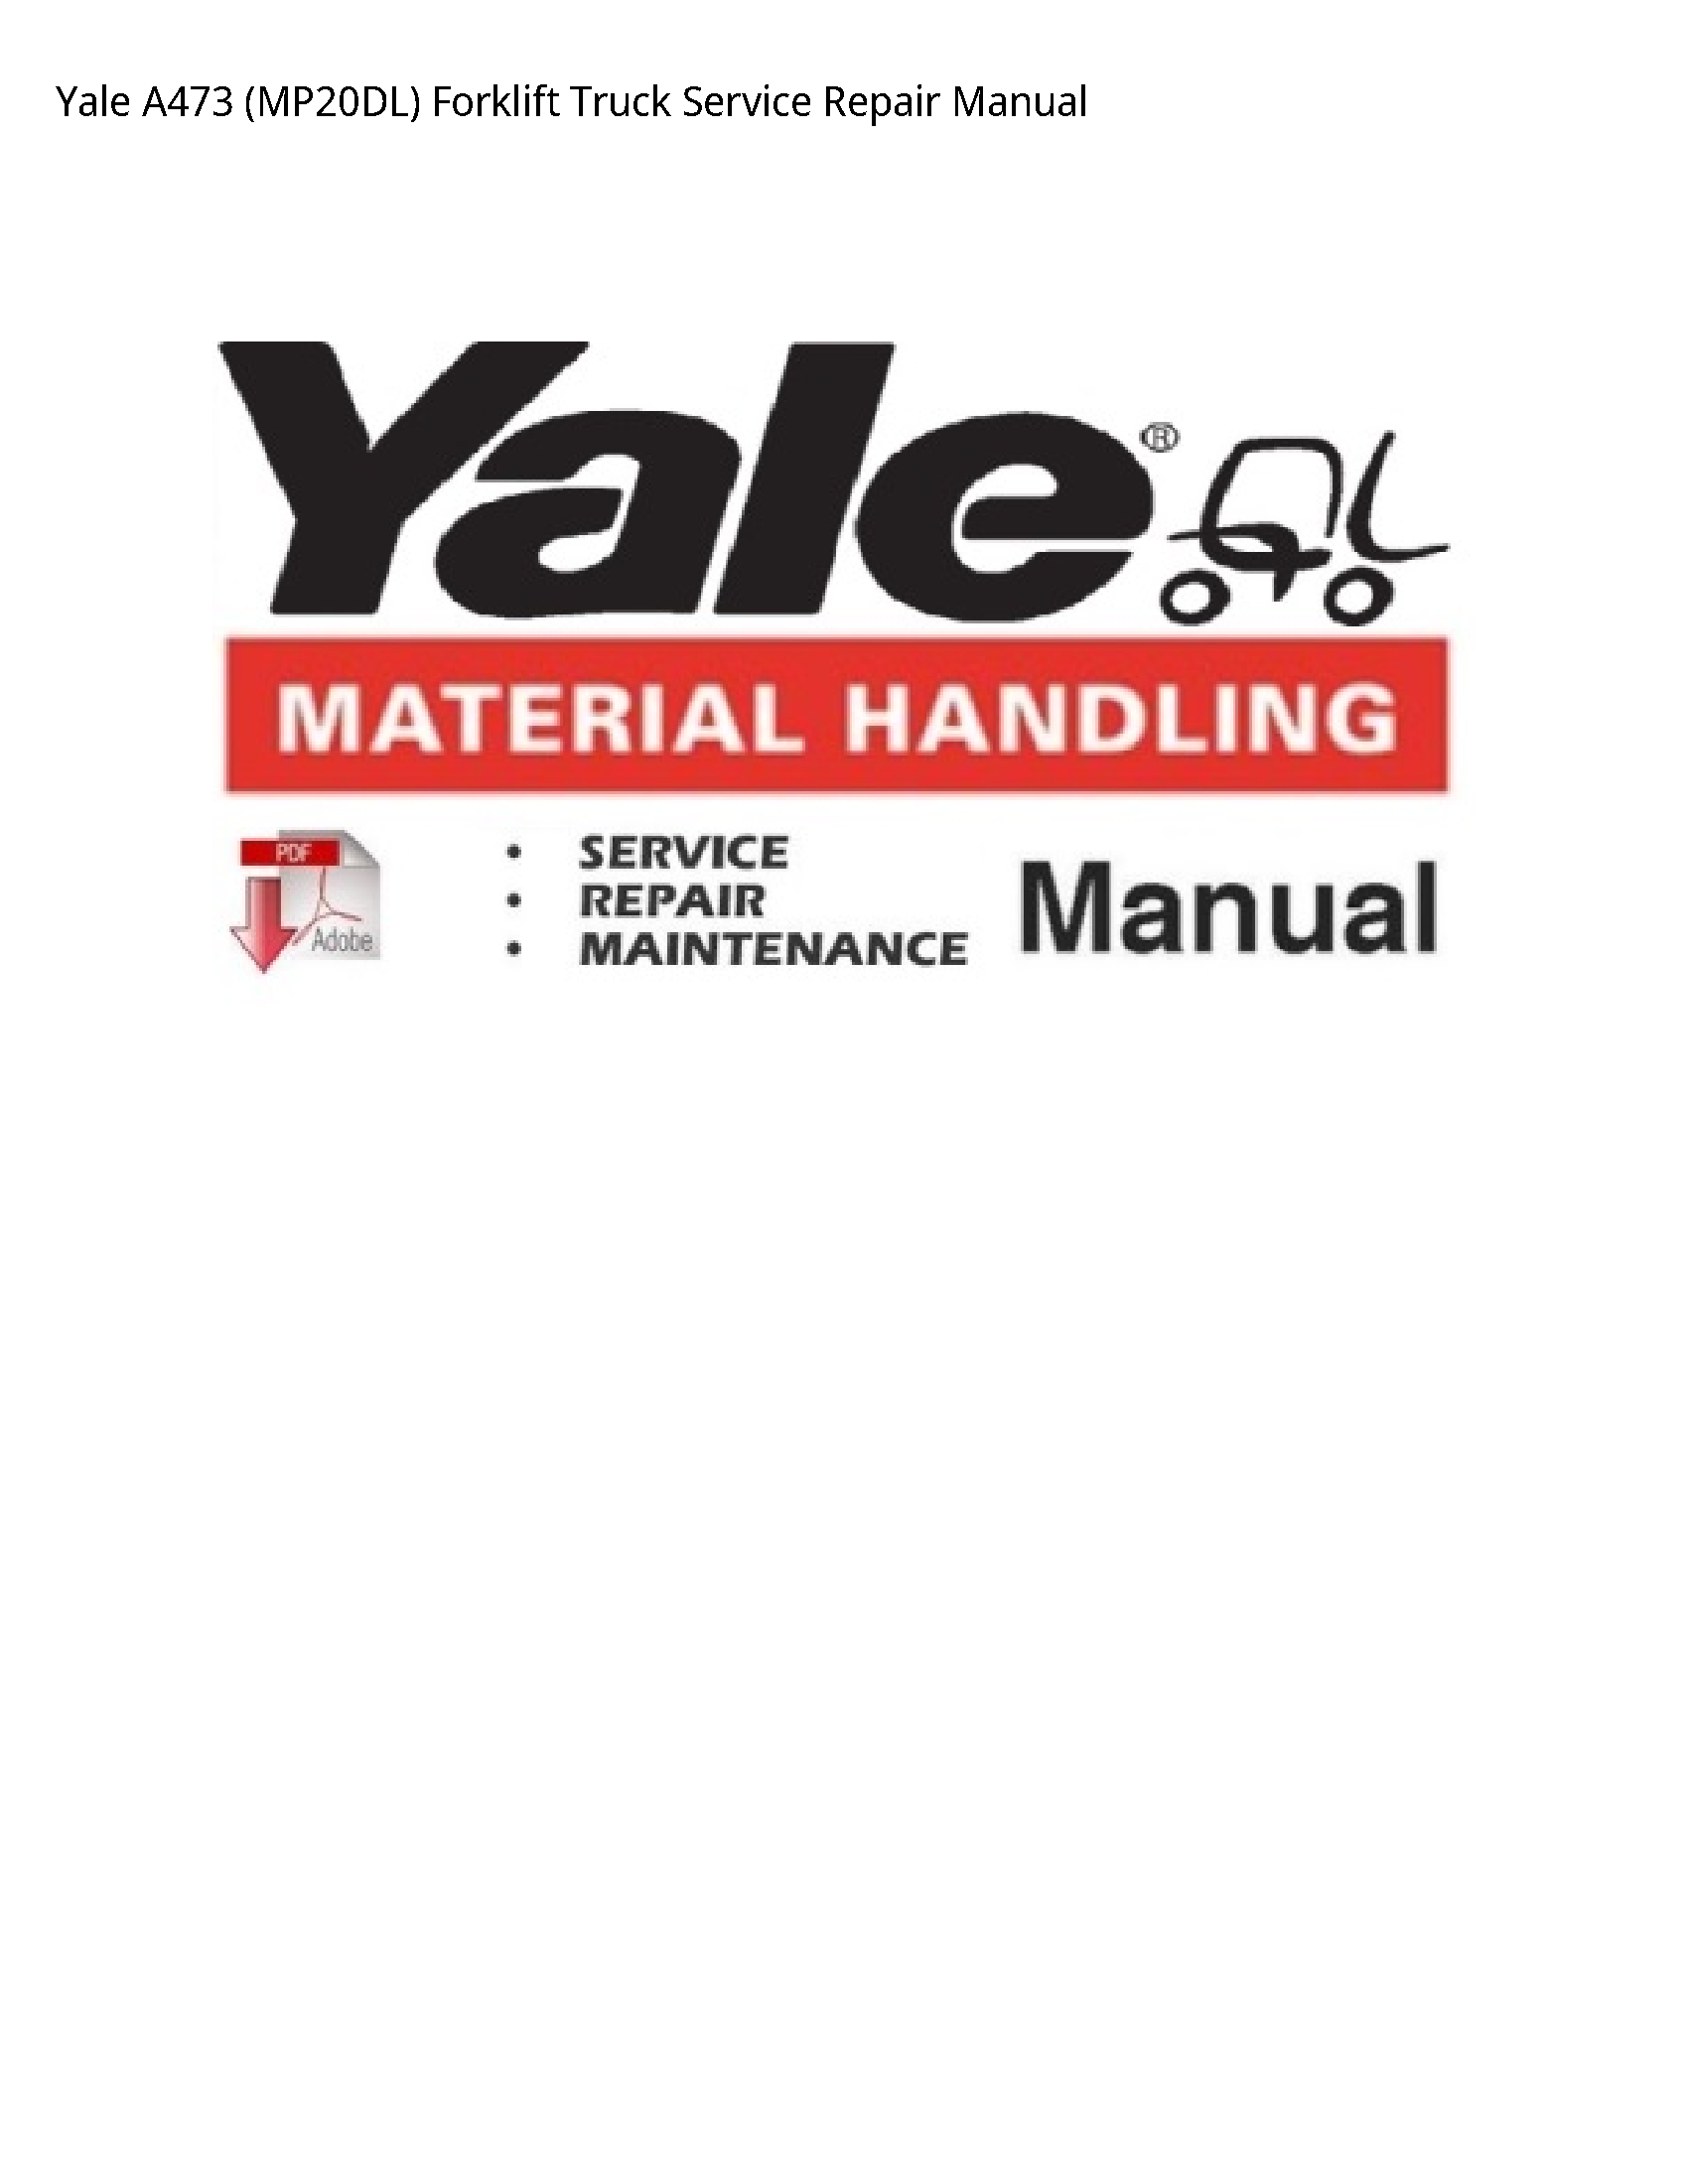 Yale A473 Forklift Truck manual